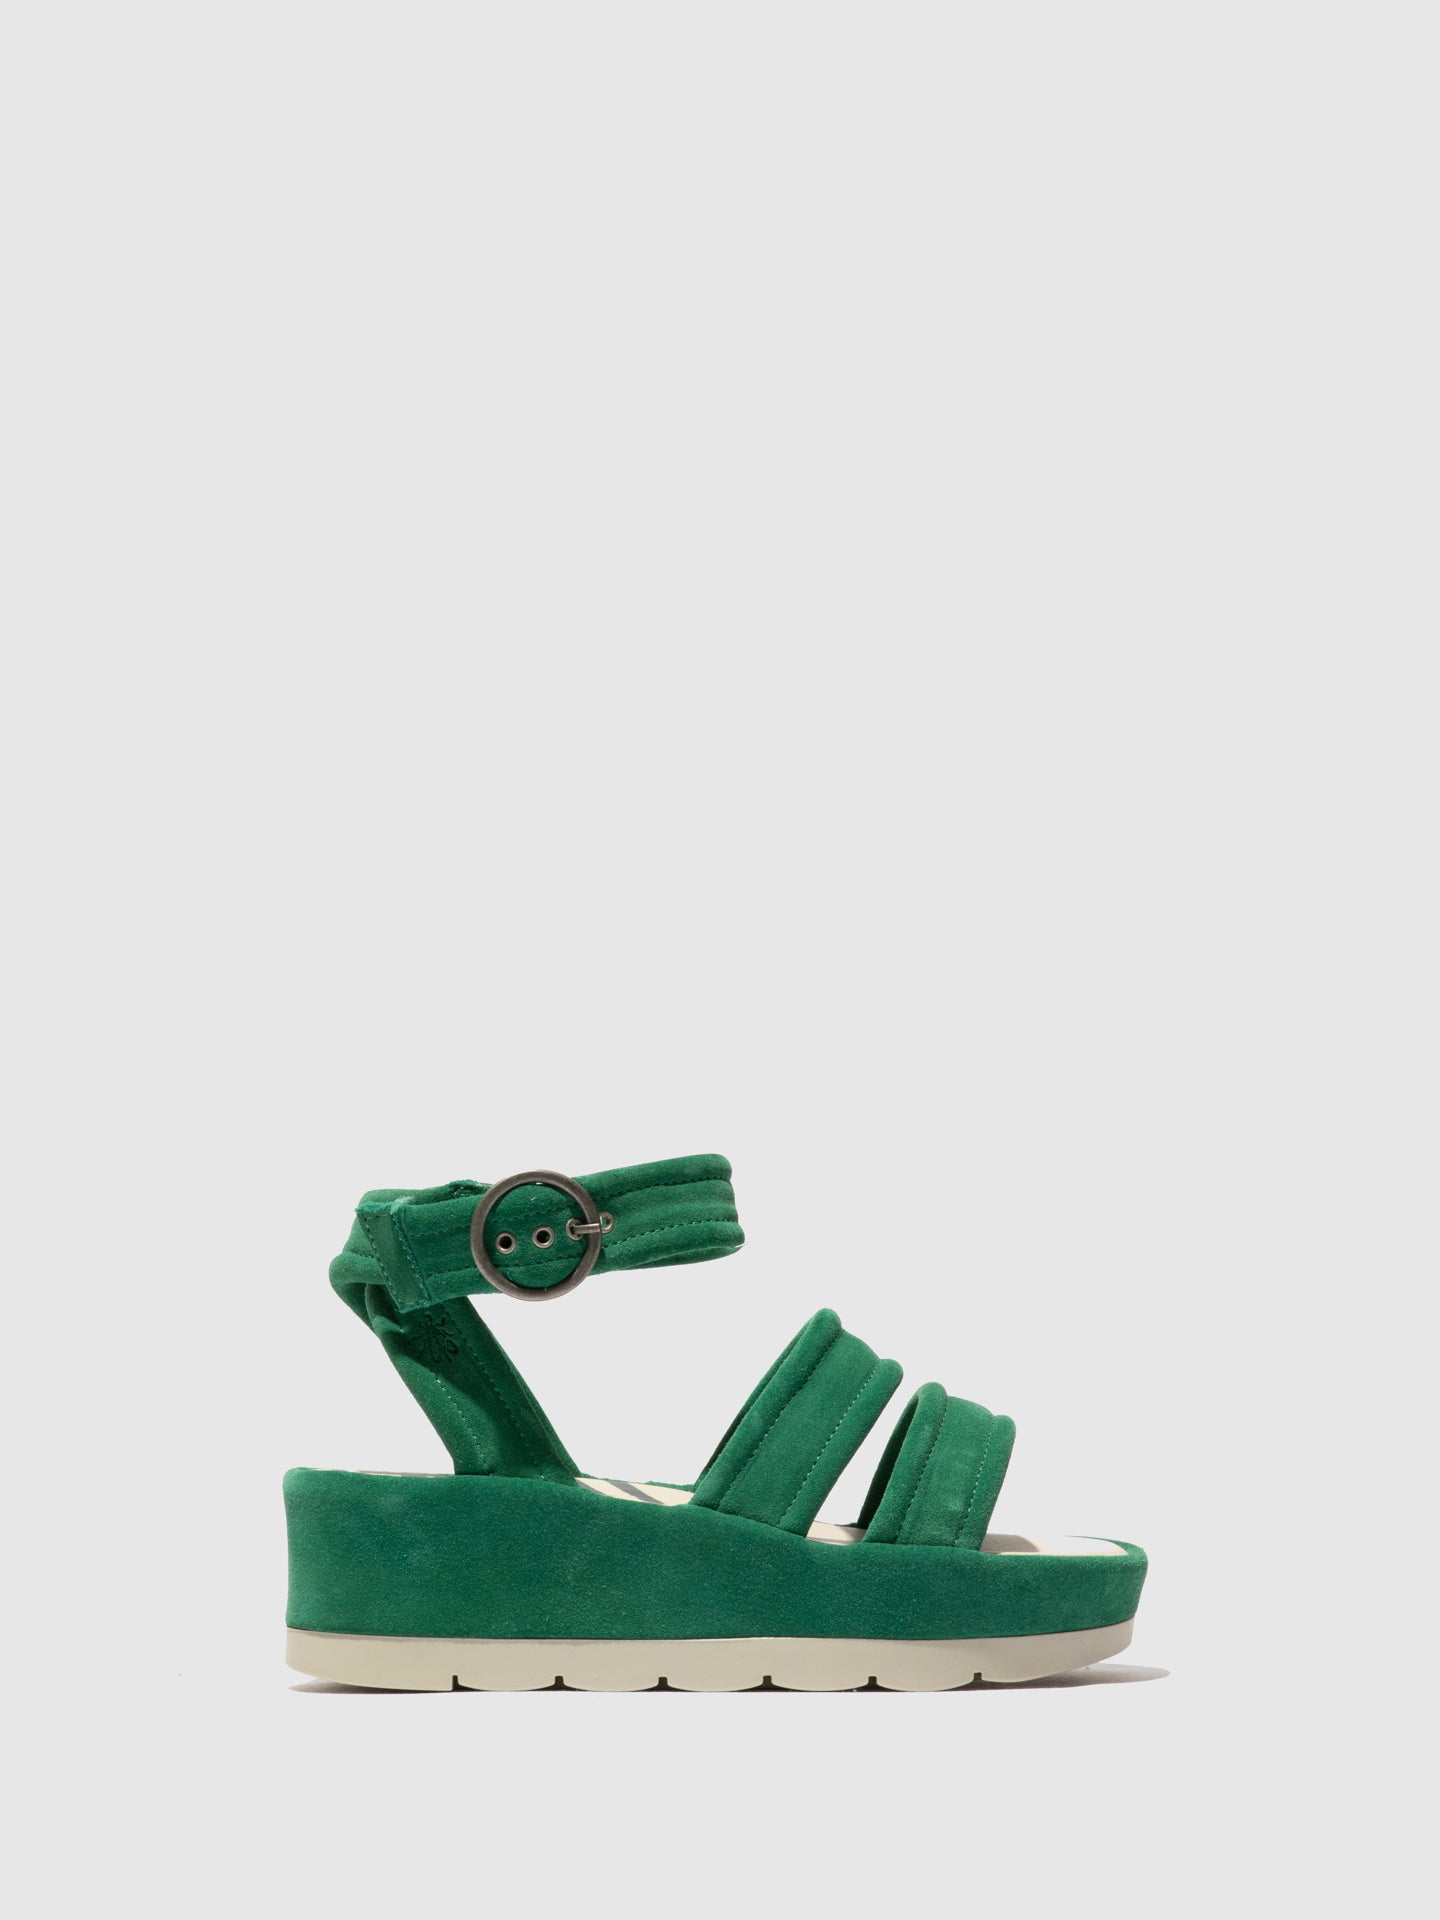 Fly London Ankle Strap Sandals BAGI170FLY AVOCADO